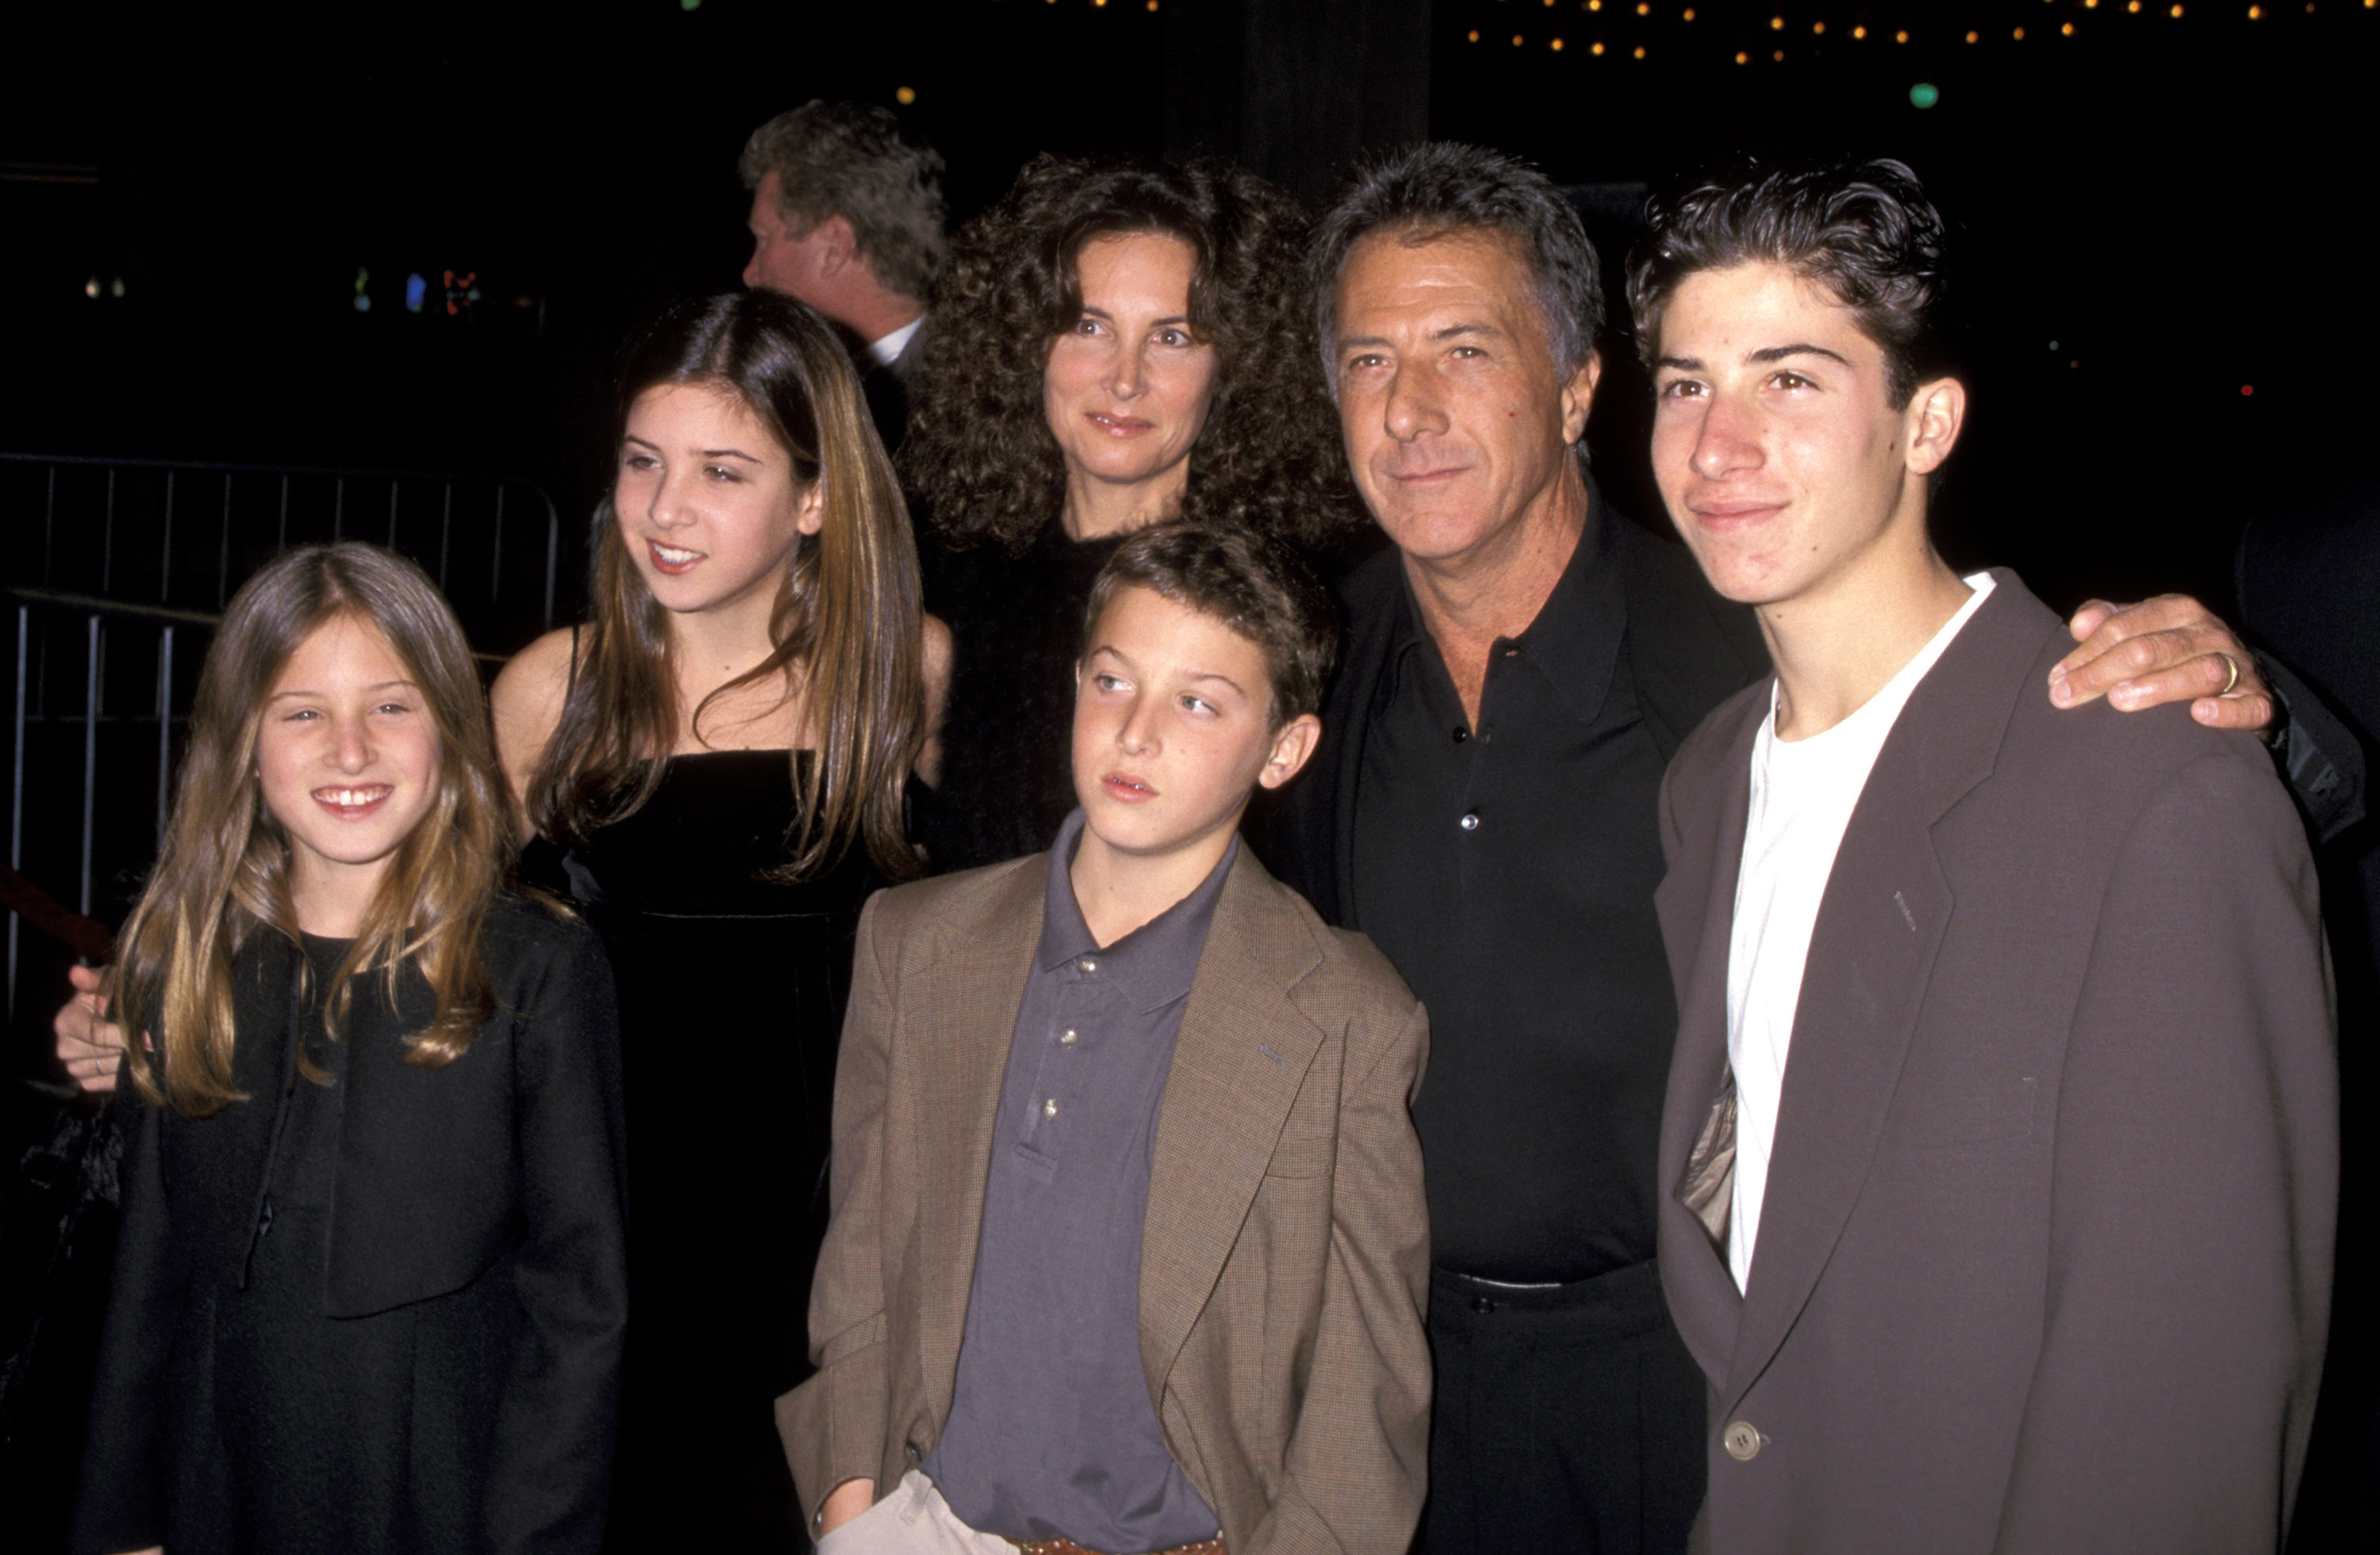 Dustin Hoffman, Lisa Hoffman, and their children during the premiere of "Wag The Dog" in Century City, California on December 17, 1997. | Source: Getty Images